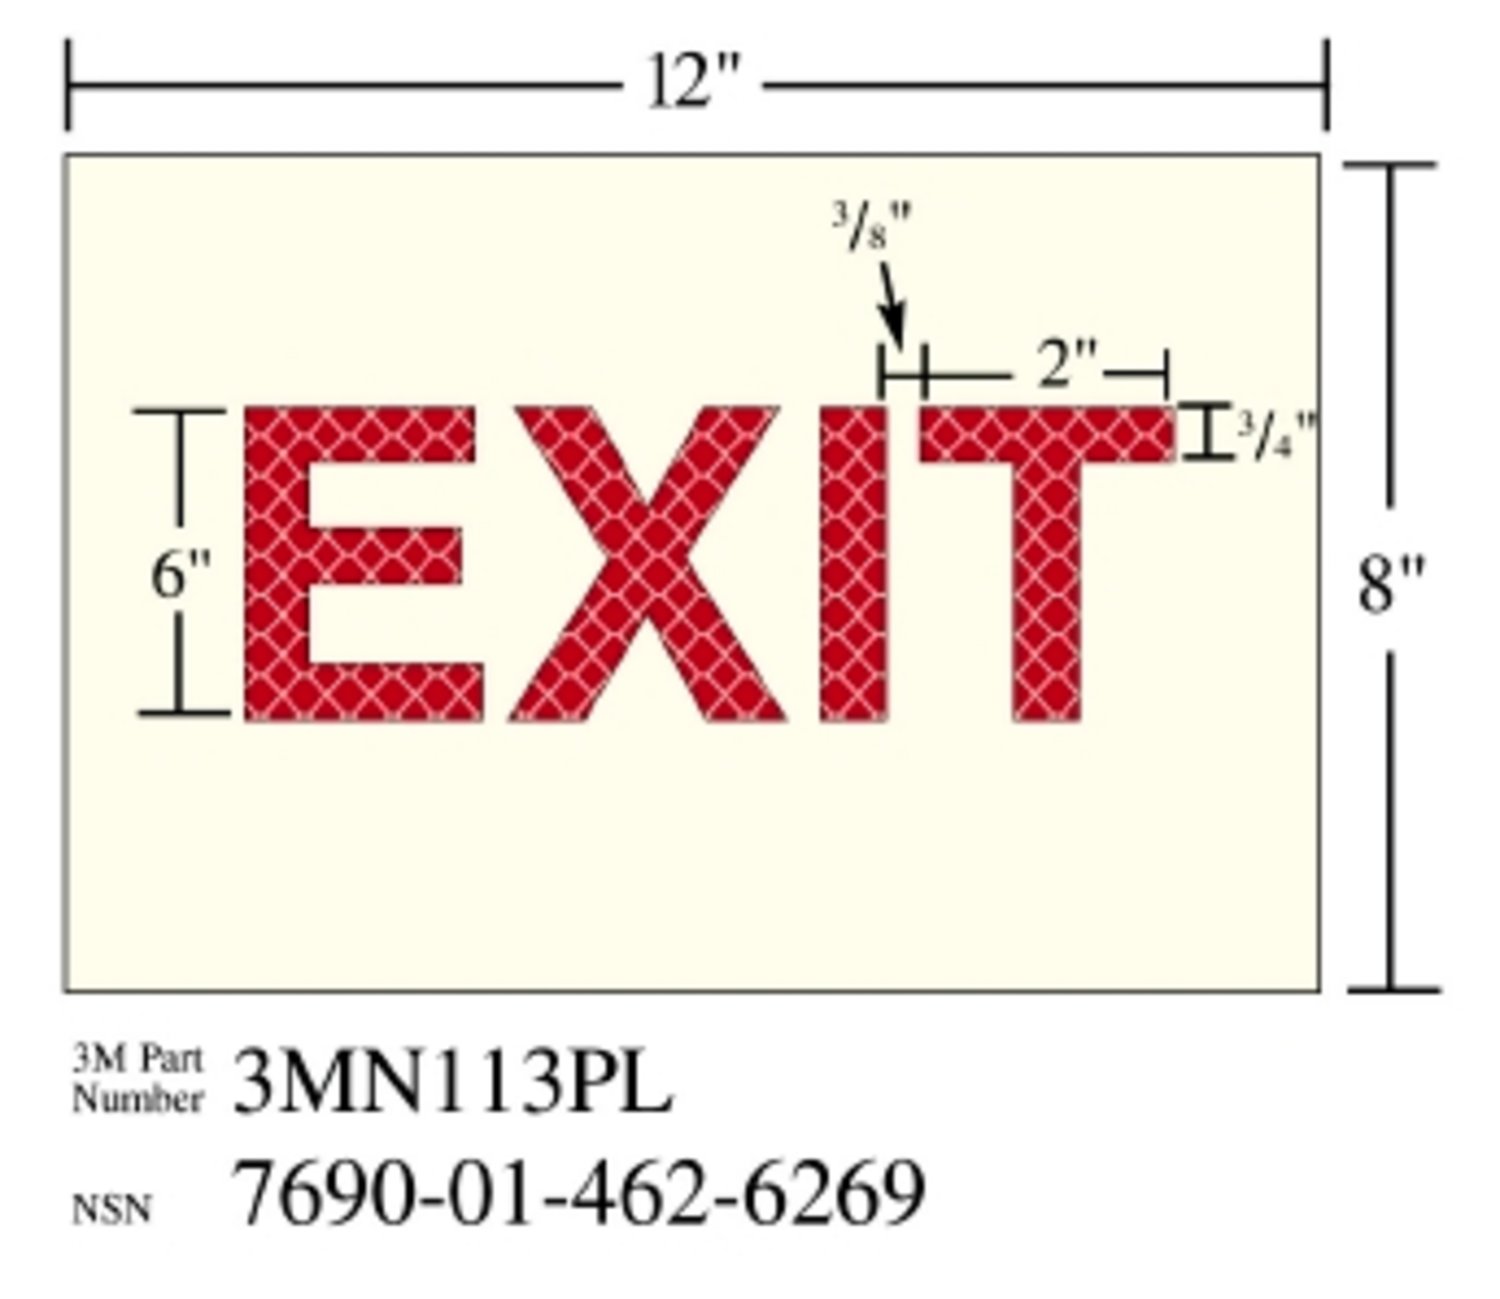 7010302551 - 3M Photoluminescent Film 6900, Shipboard Sign 3MN113PL, 12 in x 8 in,
EXIT, 10/Package